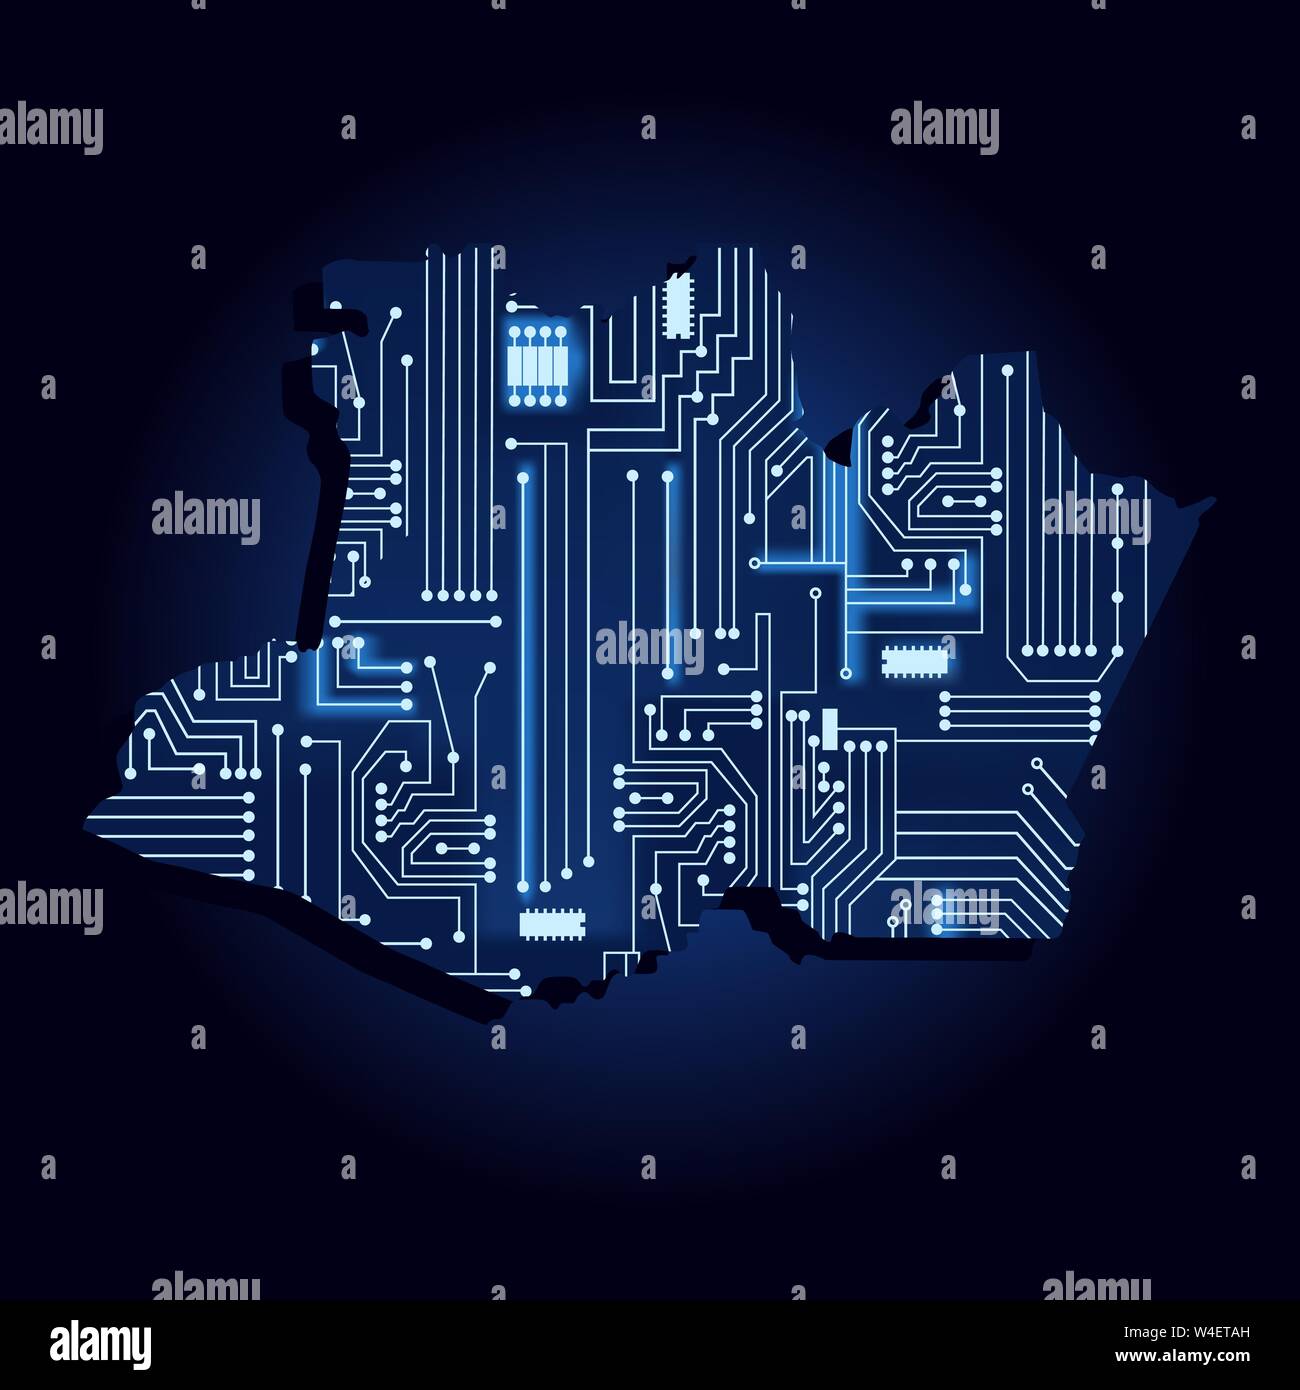 Contour map of Amazonas with a technological electronics circuit. Brazilian state. Blue background. Stock Vector